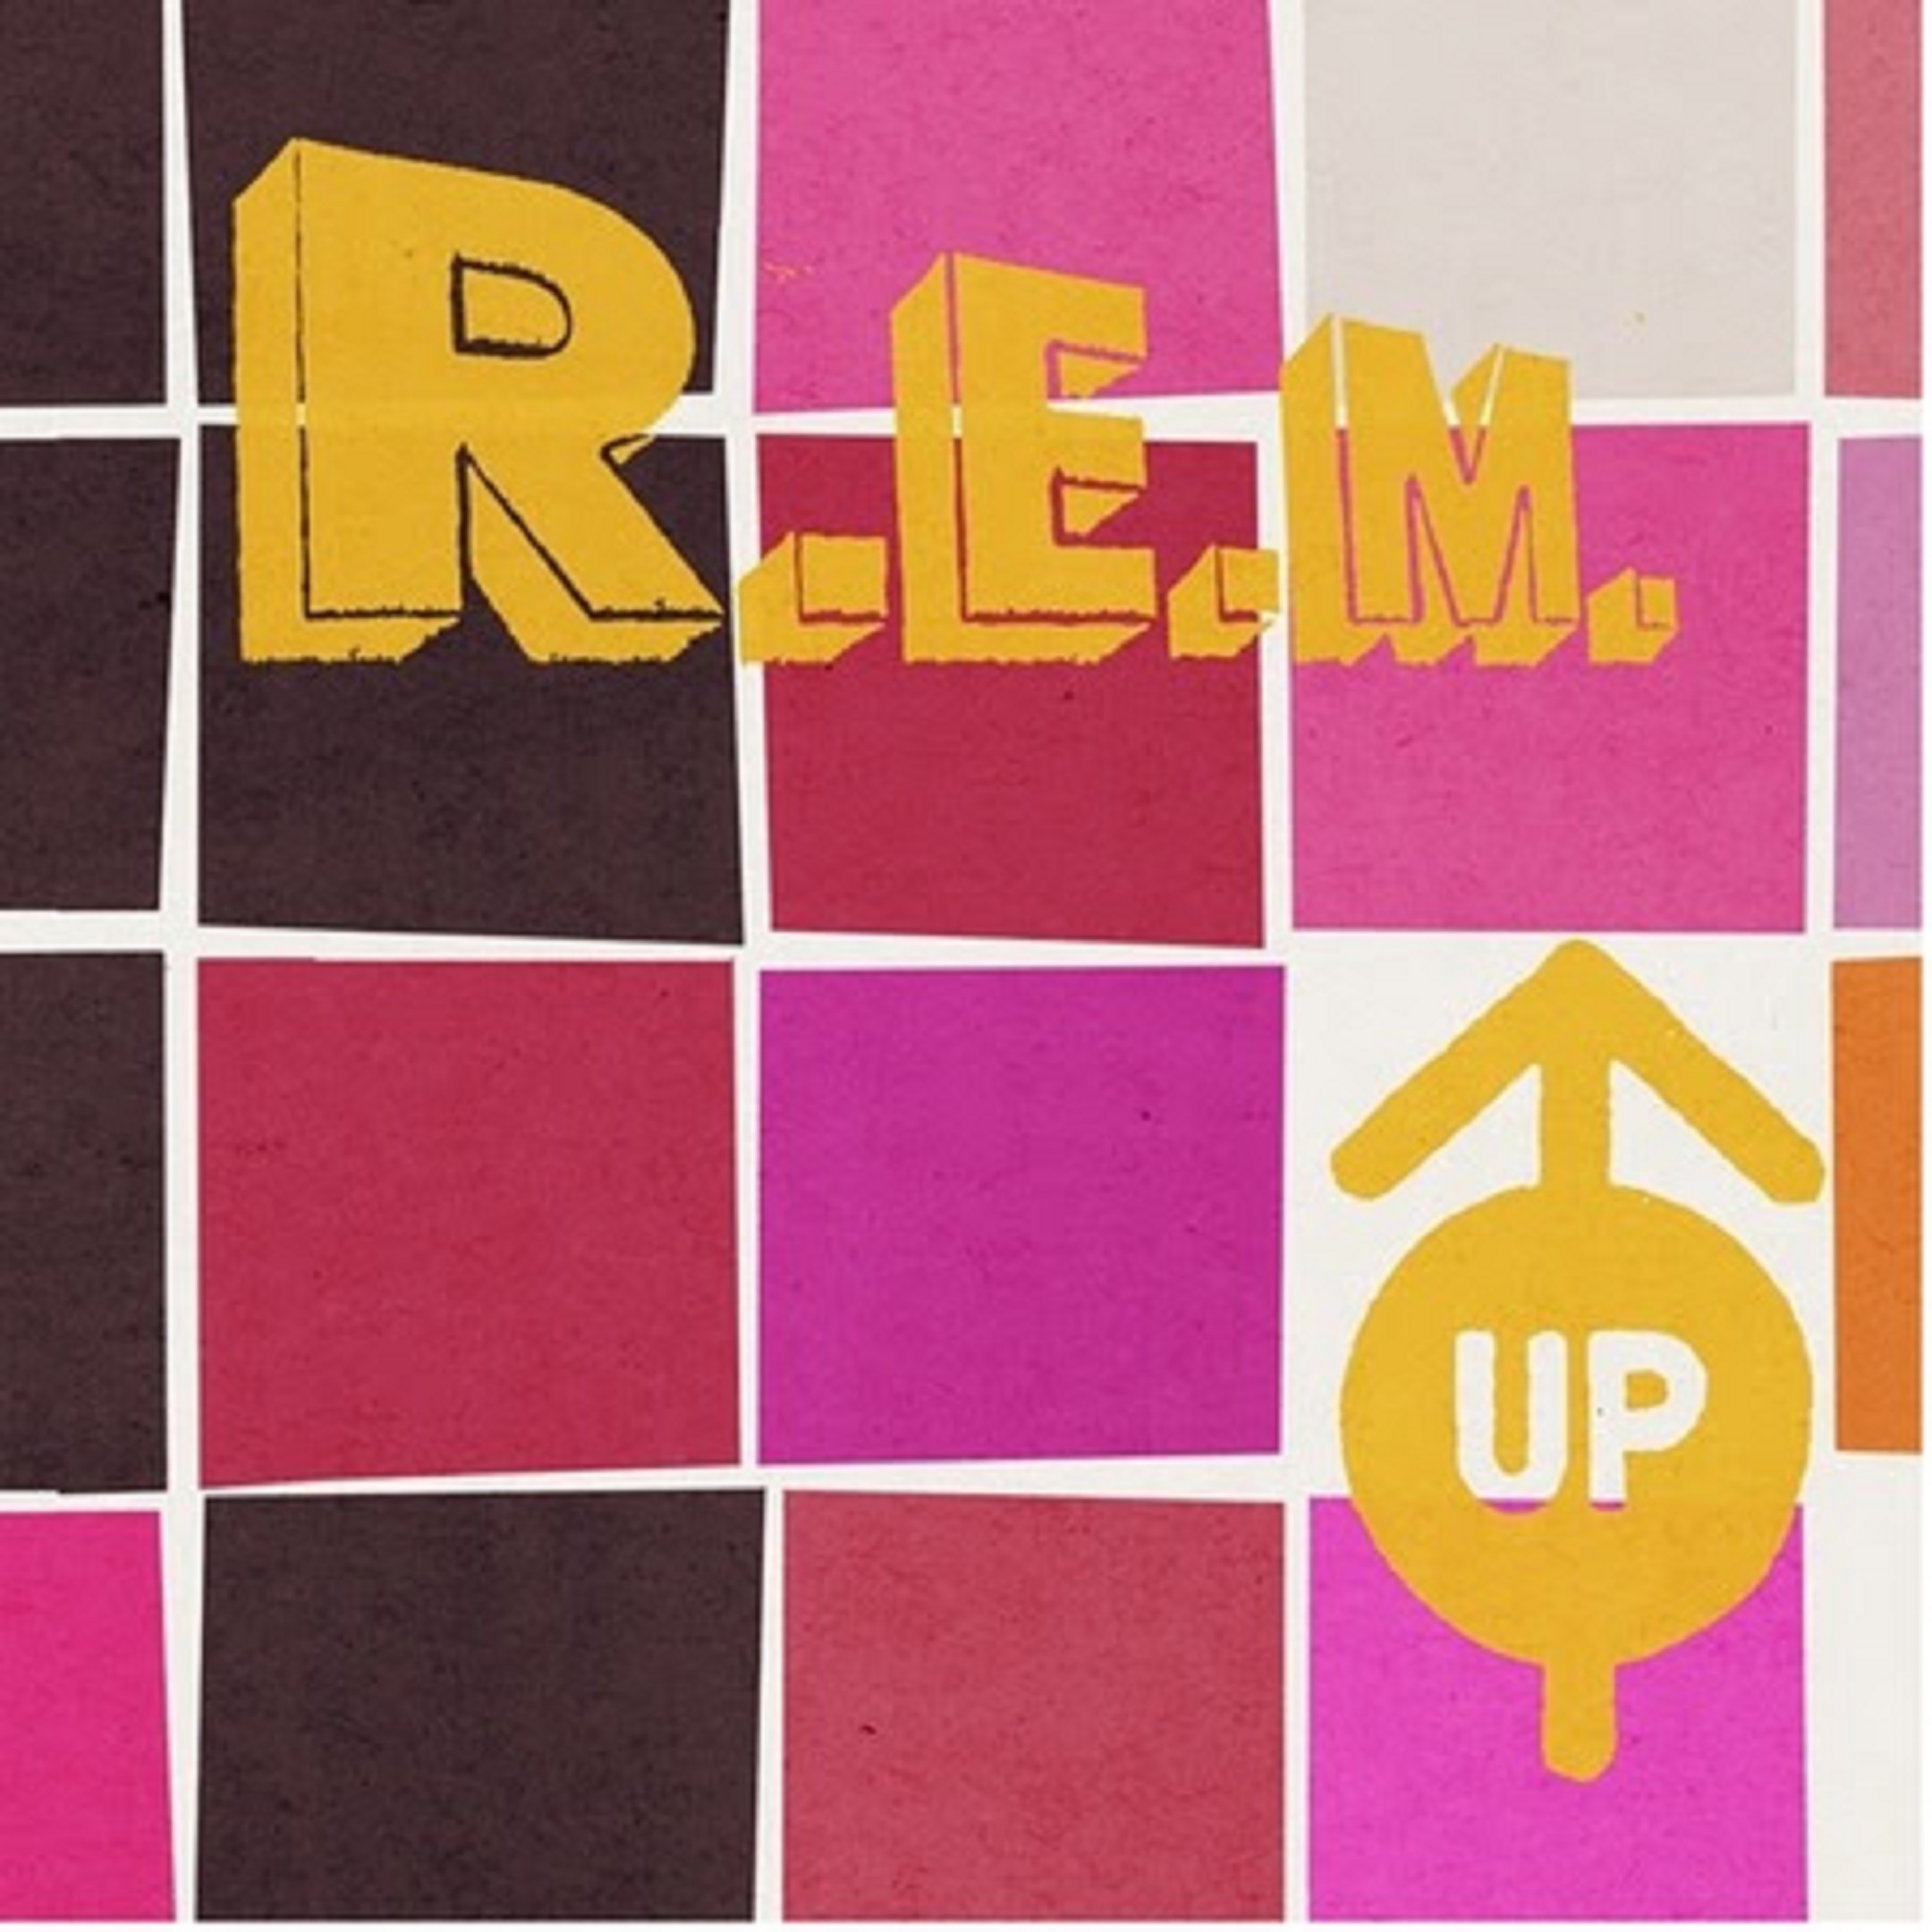 R.E.M.'s "Up" 25th Anniv Edition due Nov 10 via Craft Recordings; previously unreleased “Daysleeper (‘Party of Five’ Recording)” debuts today